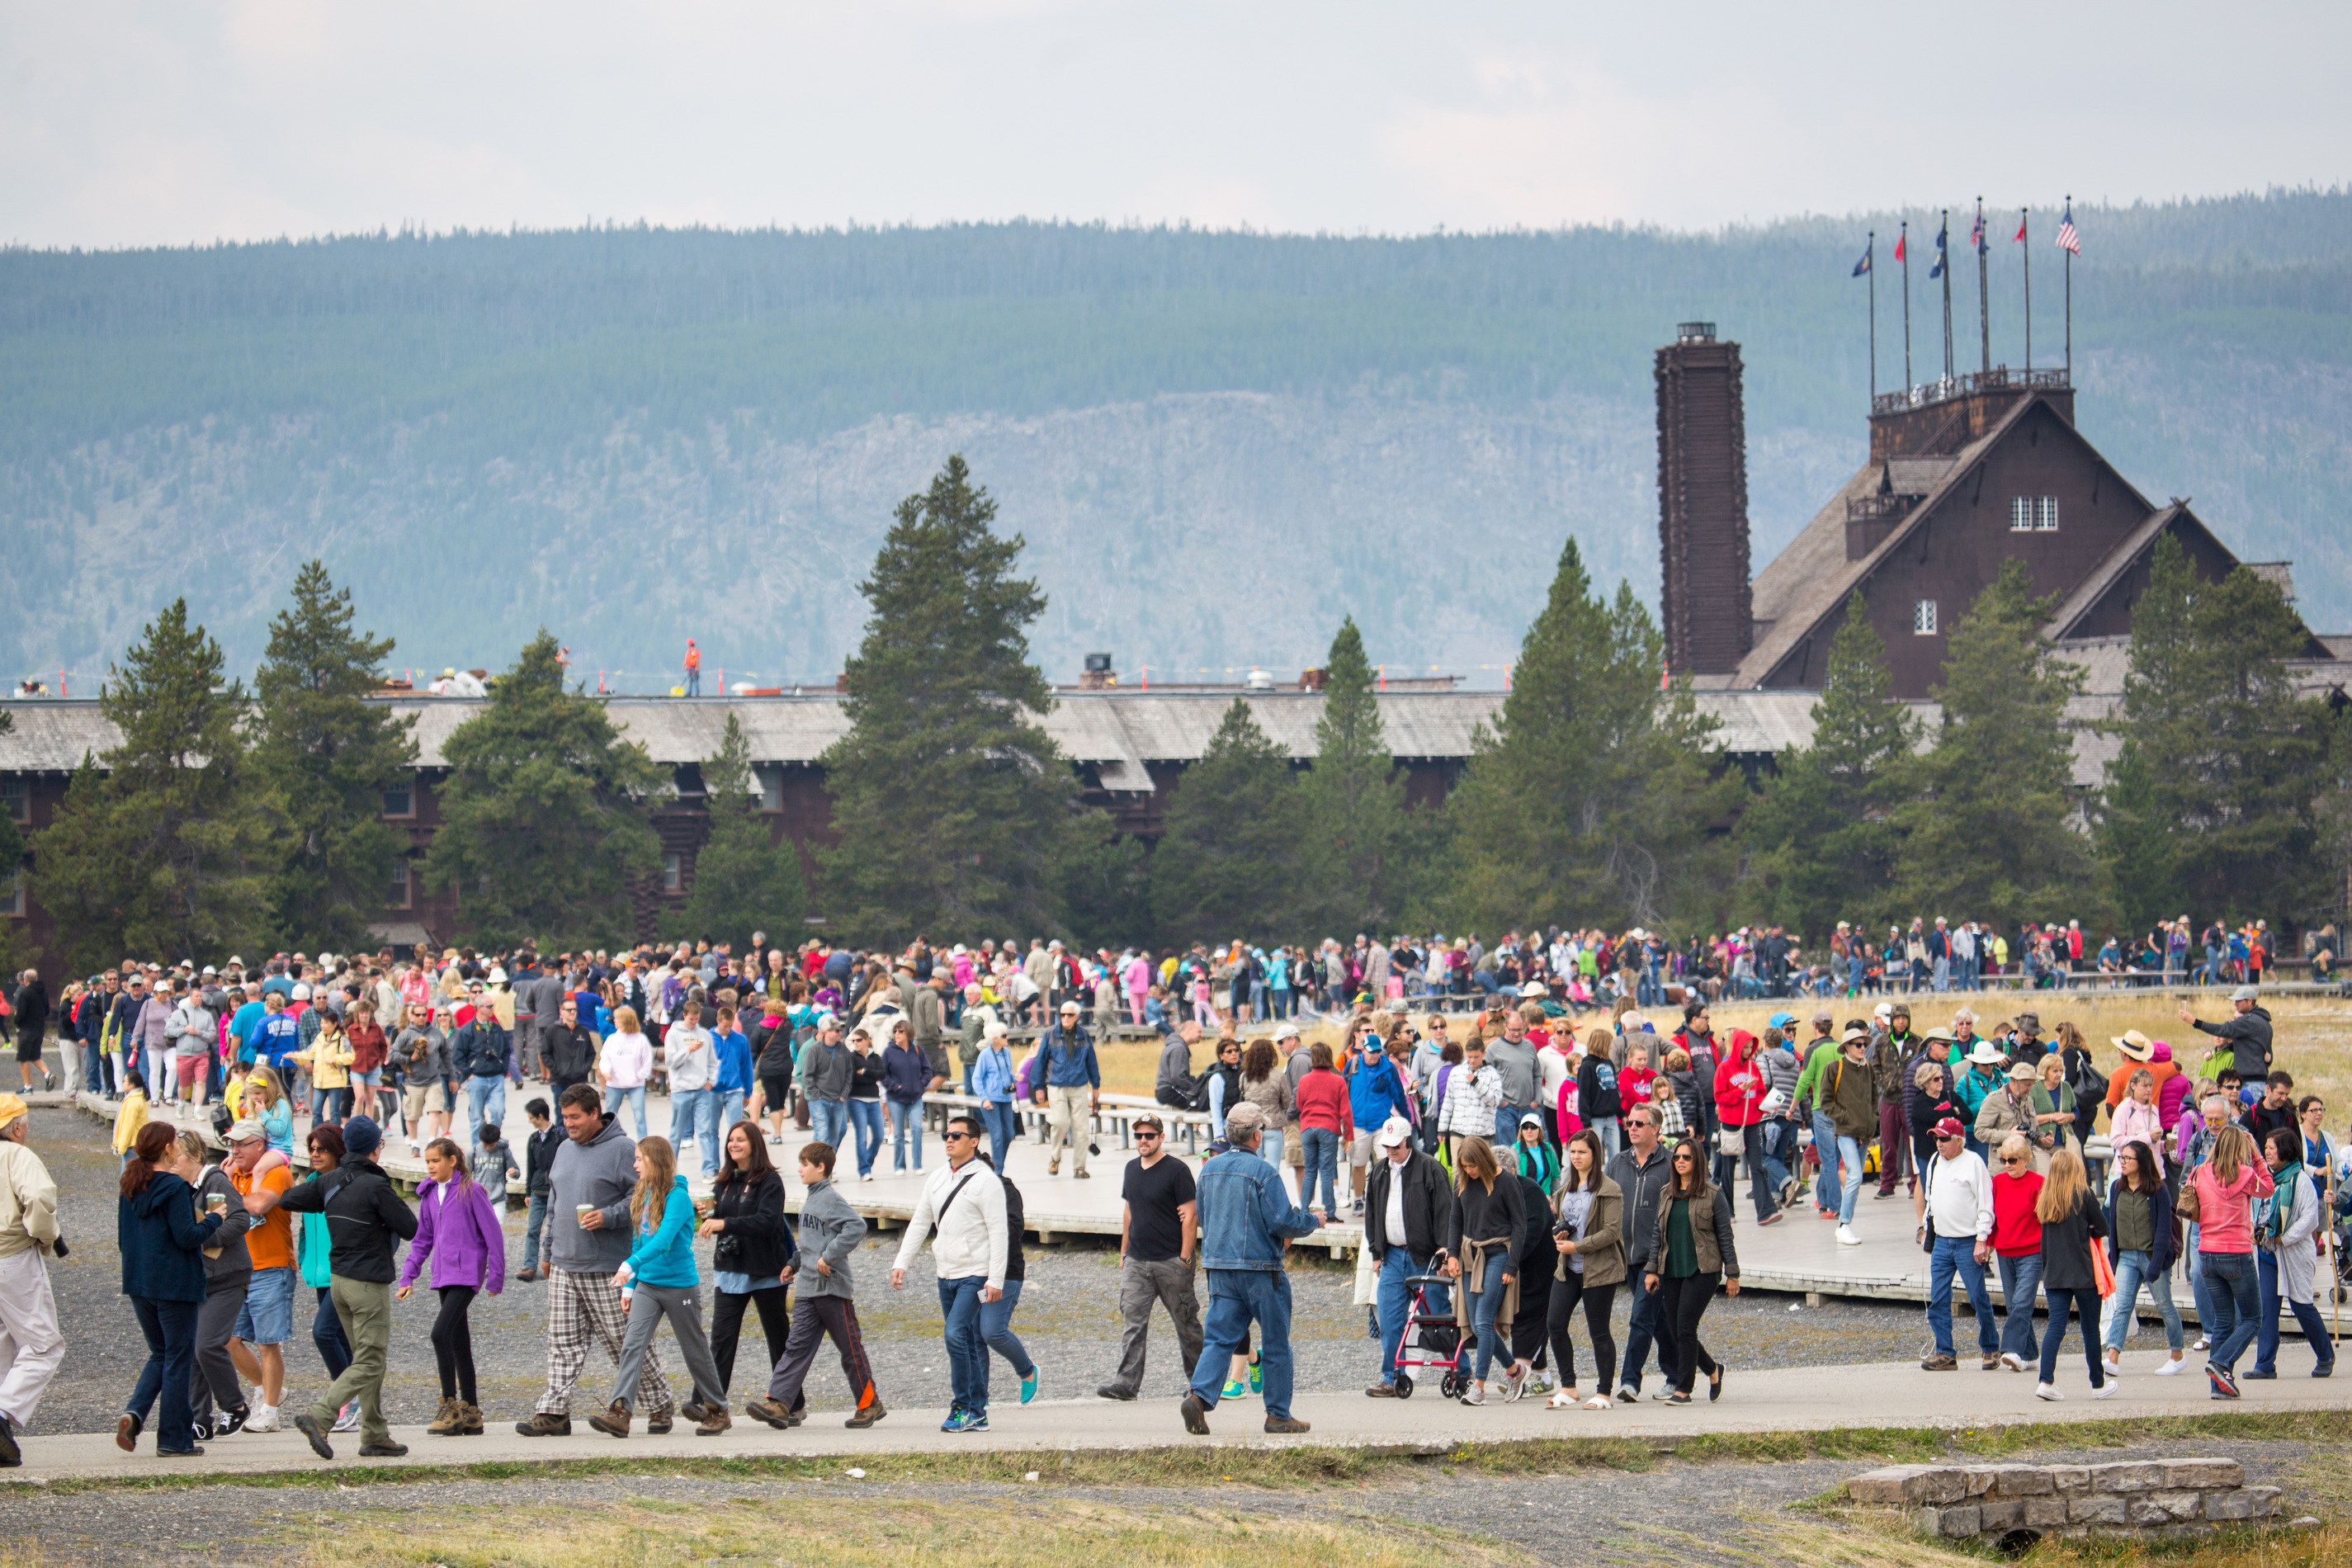 Hundreds of people walking on the boardwalk with Old Faithful Inn in the background.